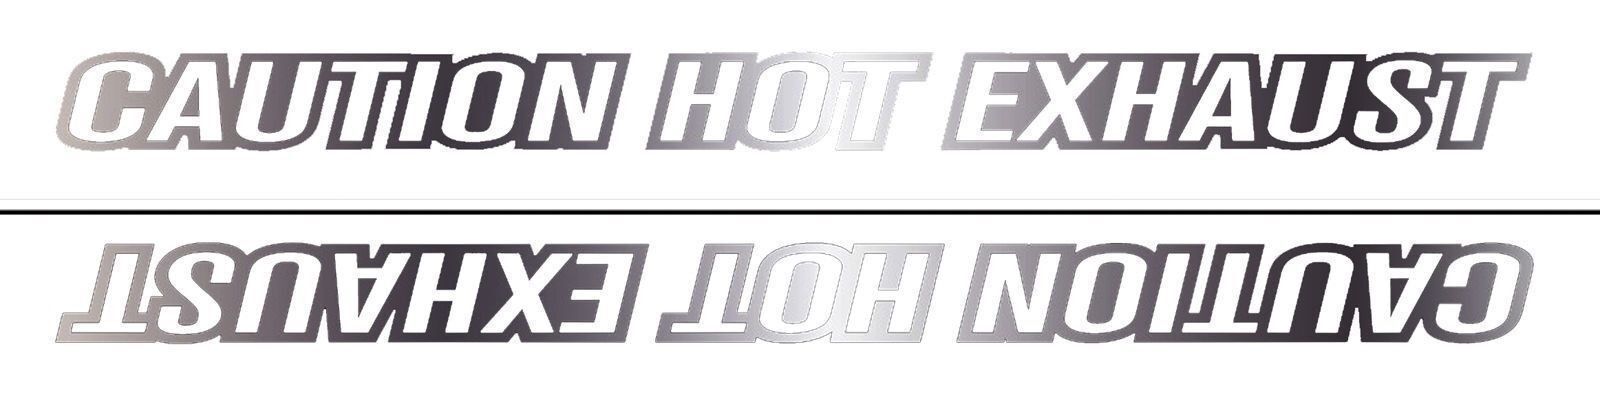 Caution Hot Exhaust Warning Decals fits Backdraft Cobra Shelby Cobra MG 6850 